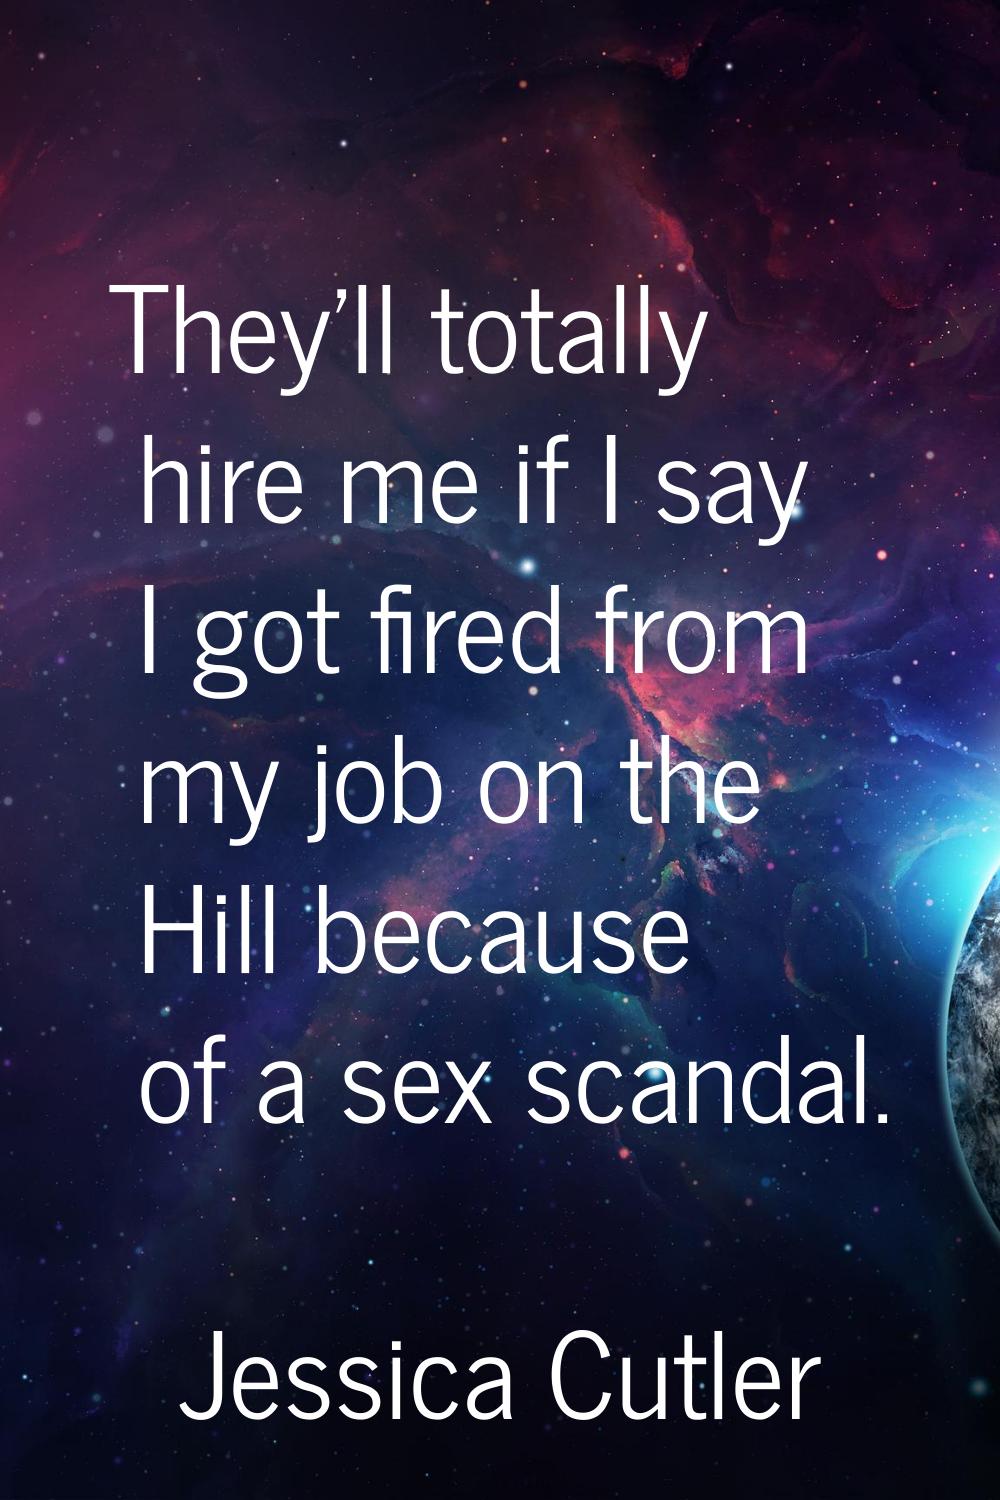 They'll totally hire me if I say I got fired from my job on the Hill because of a sex scandal.